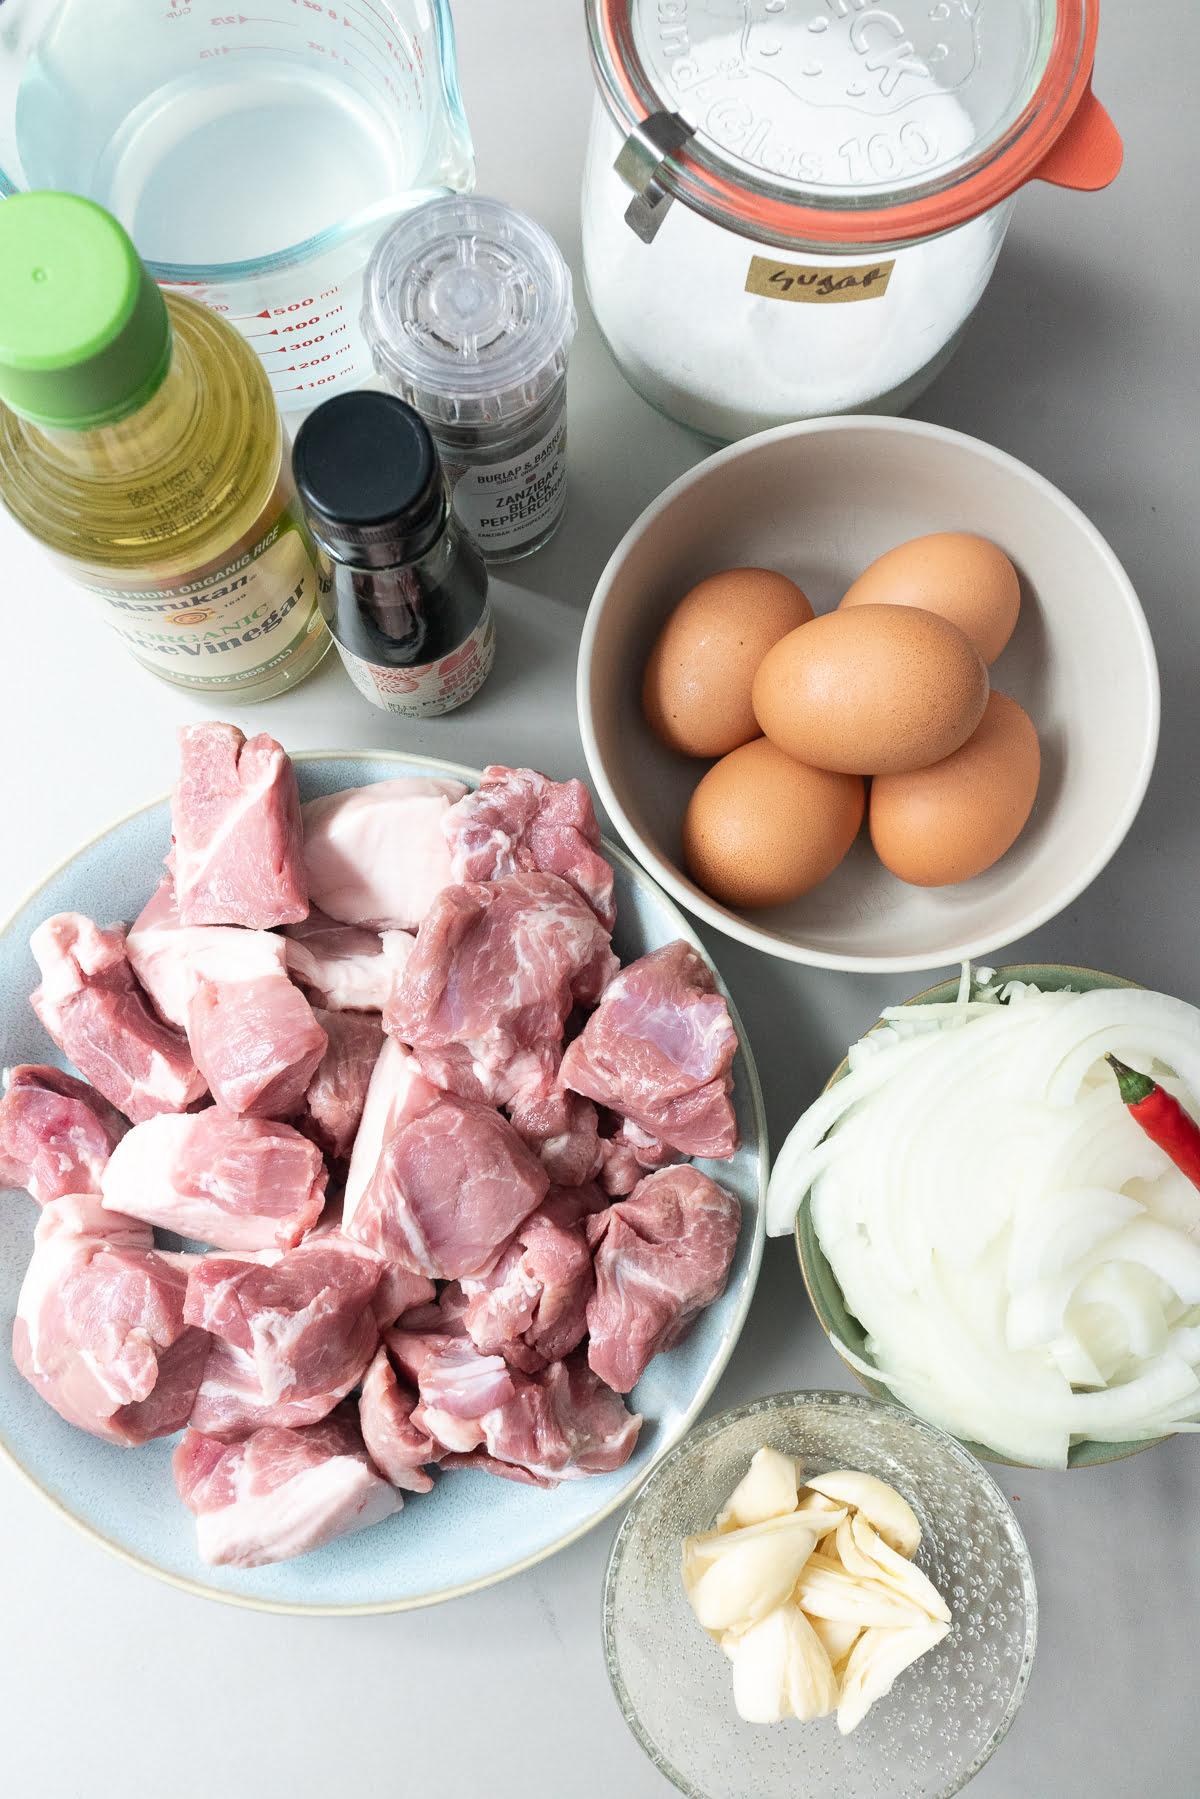 An overhead shot of the ingredients for Thit Kho (Vietnamese Braised Pork and Egg): pork shoulder, hard boiled eggs, garlic, onions, chili pepper, rice vinegar, coconut water, back peppercorns, fish sauce, and sugar.